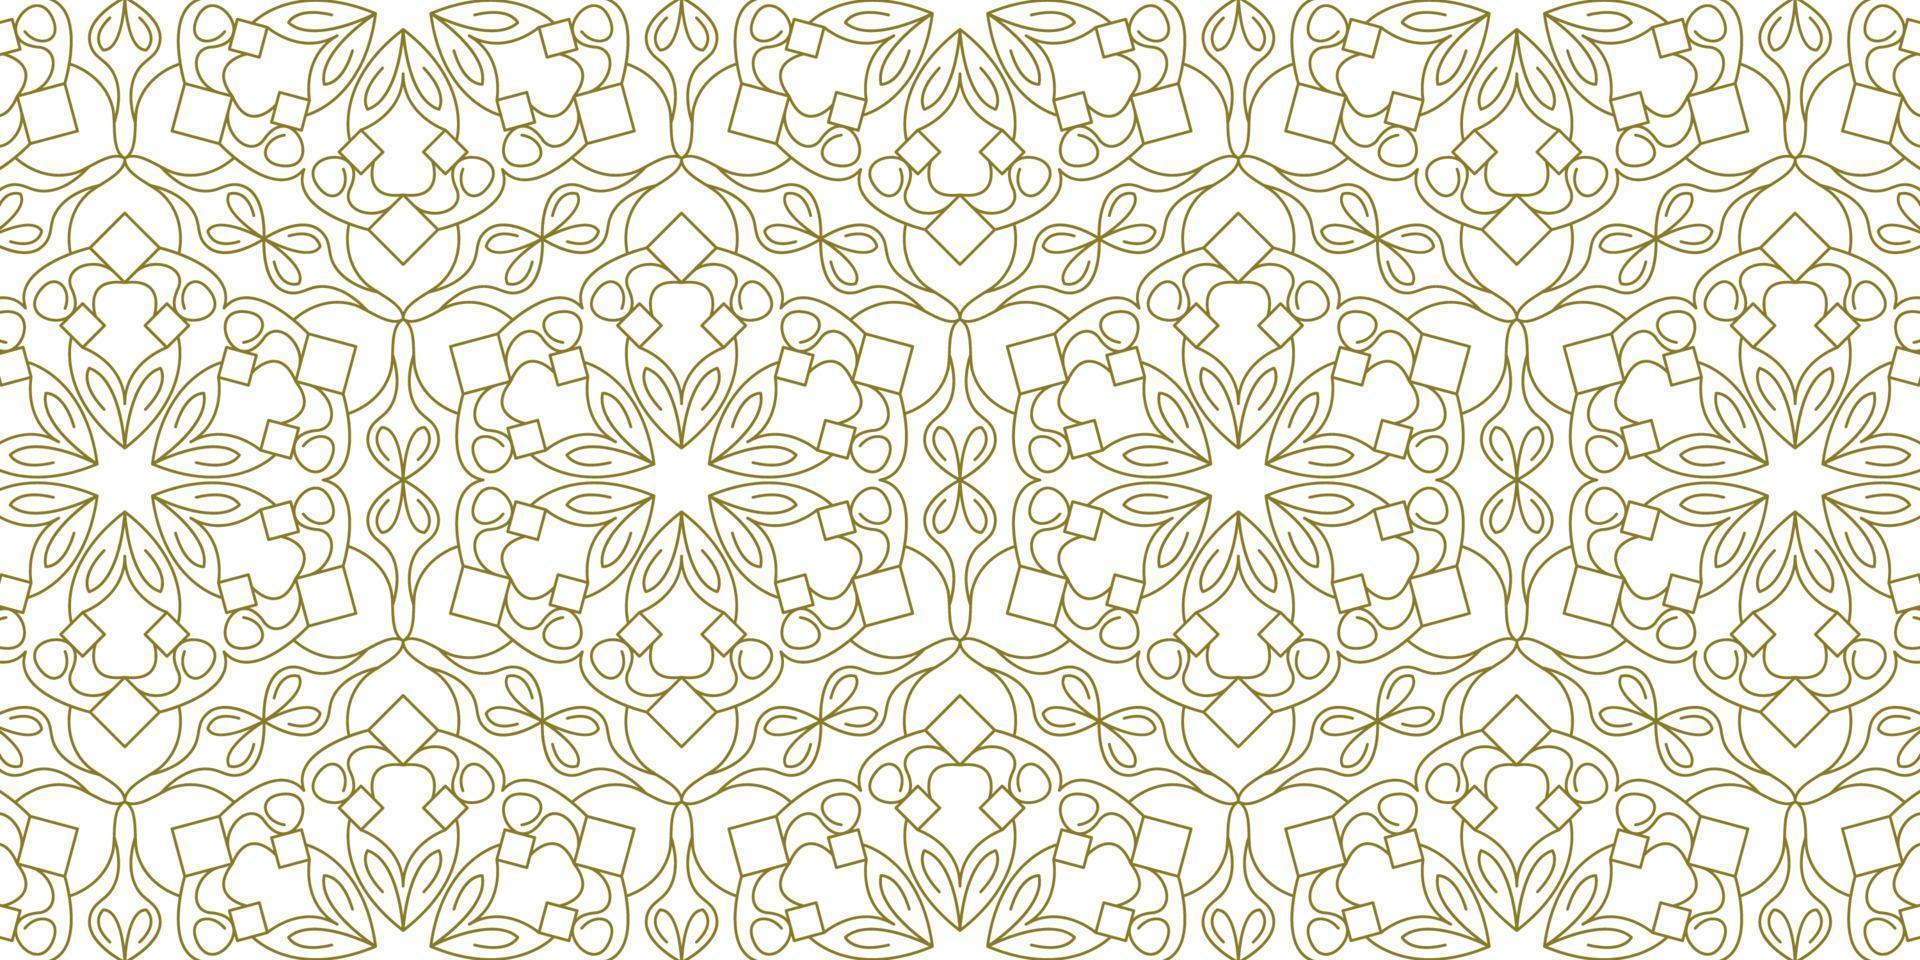 gold line pattern ethnic background vector